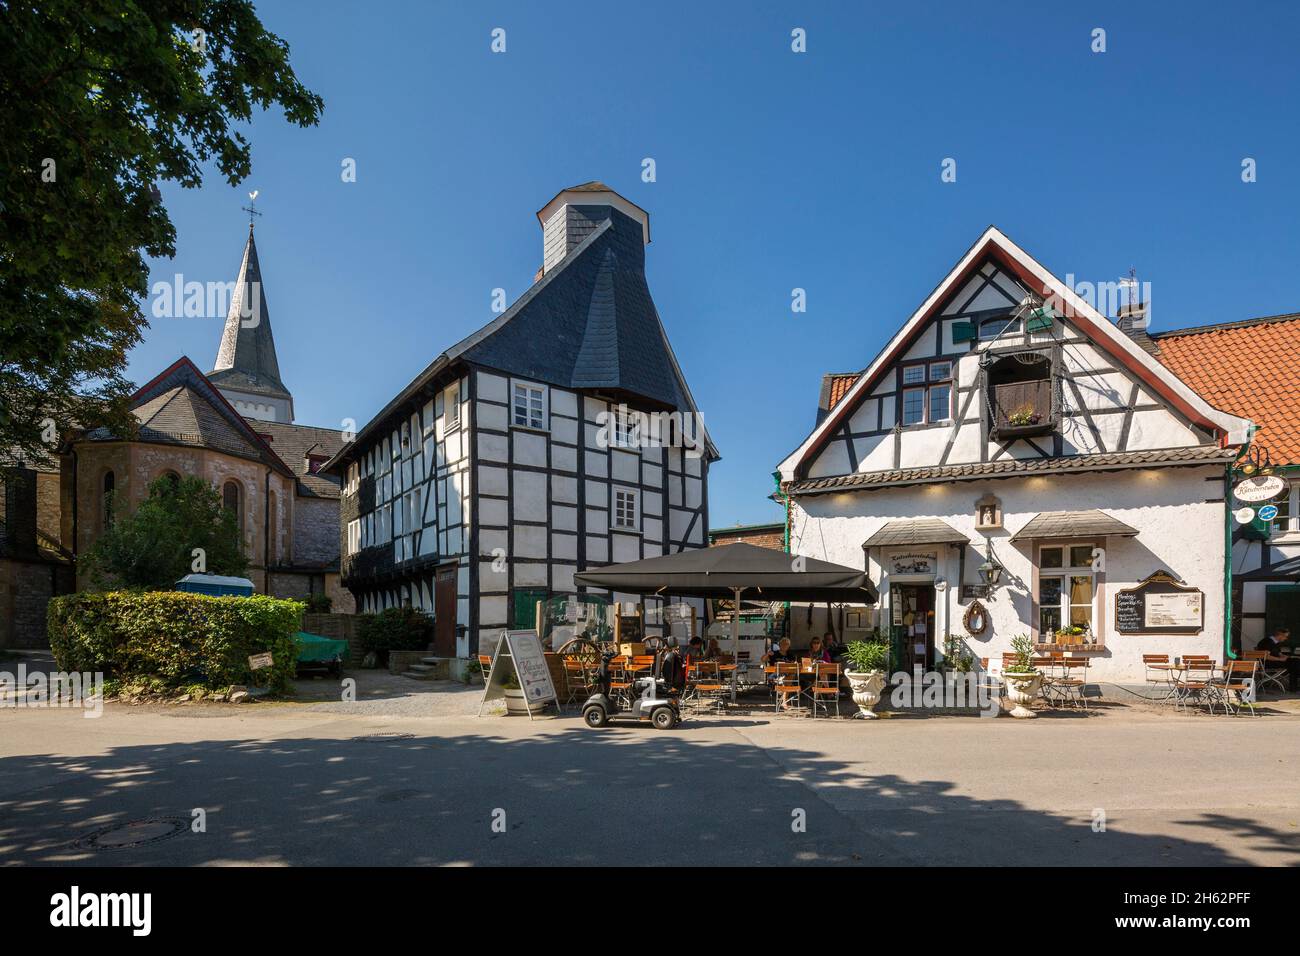 germany,wuelfrath,wuelfrath-duessel,bergisches land,niederbergisches land,niederberg,rhineland,north rhine-westphalia,dorfstrasse in the village of duessel,from left to right catholic church st. maximin,half-timbered house eyser,eyserhaus,residential house,formerly kuesterhaus and school,half-timbered building 'am iser 'with kutscherstuben restaurant and cafe Stock Photo